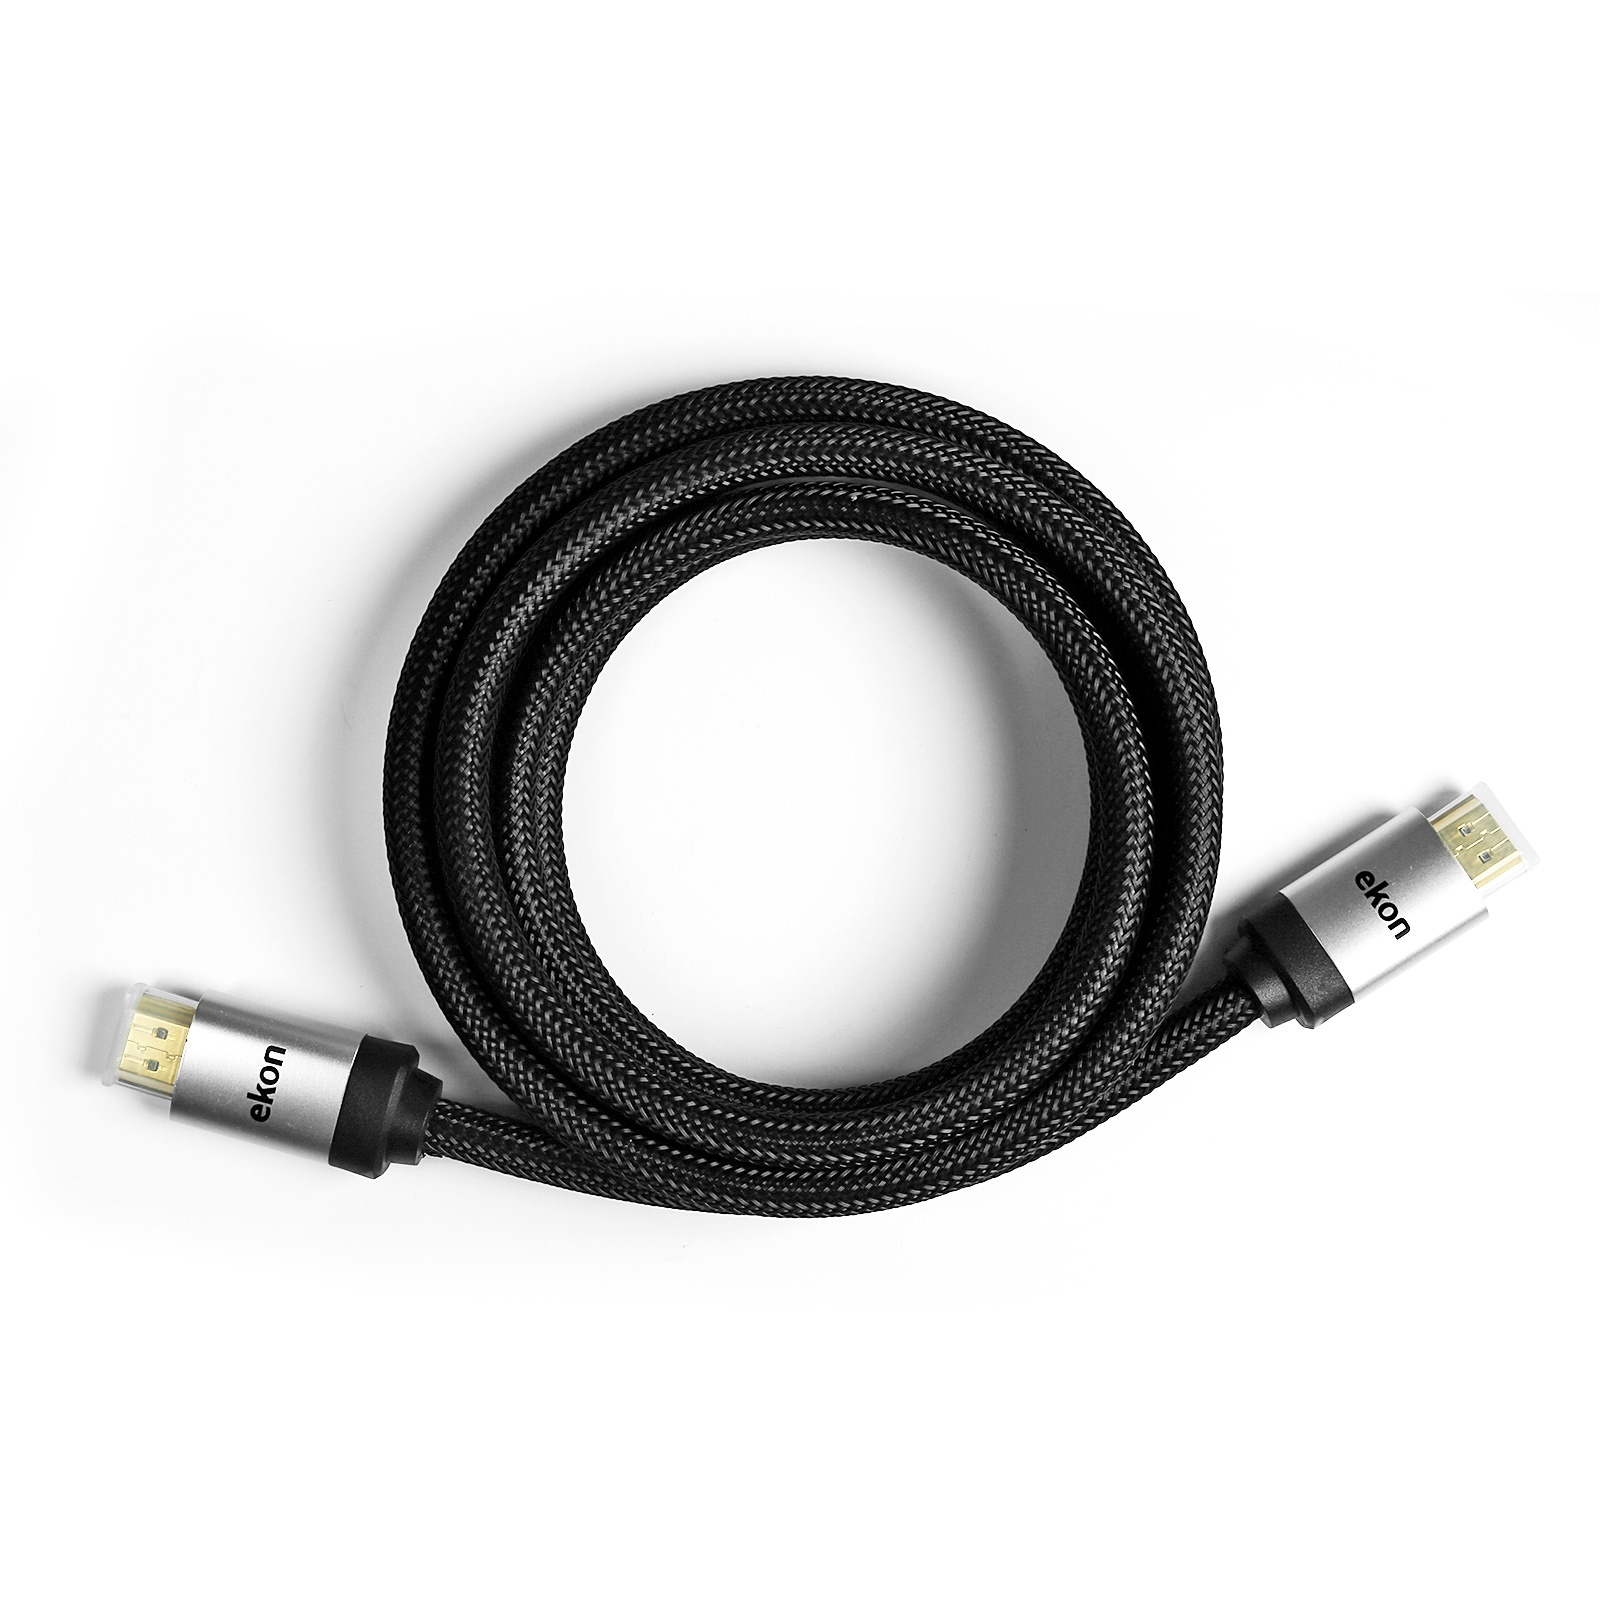 EKON HDMI V 1.4 cable male to male high speed with ethernet. OD 6.0mm.  Conductor pure copper,30 AWG, jacket black color. Connector PVC black  color and gold plated. Shielding: Al-foil with al-mg braid. + ferrite core. Total Lenght 5.0  mt